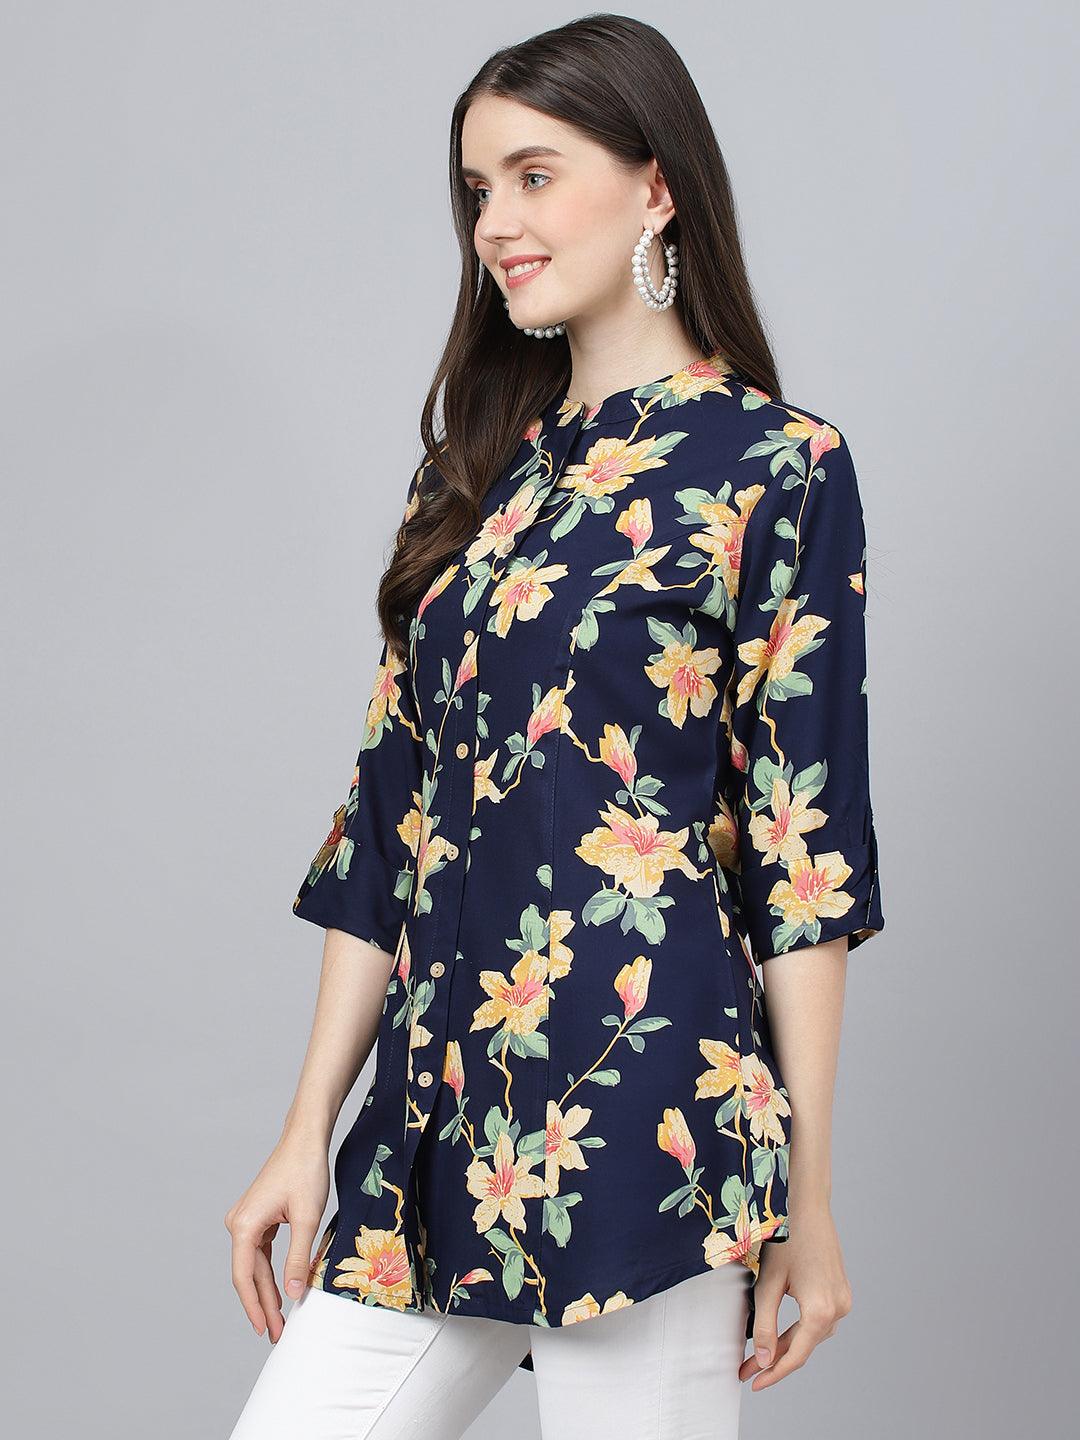 Divena Navy Blue Floral printed Rayon A-line Shirts Style Top - divena world